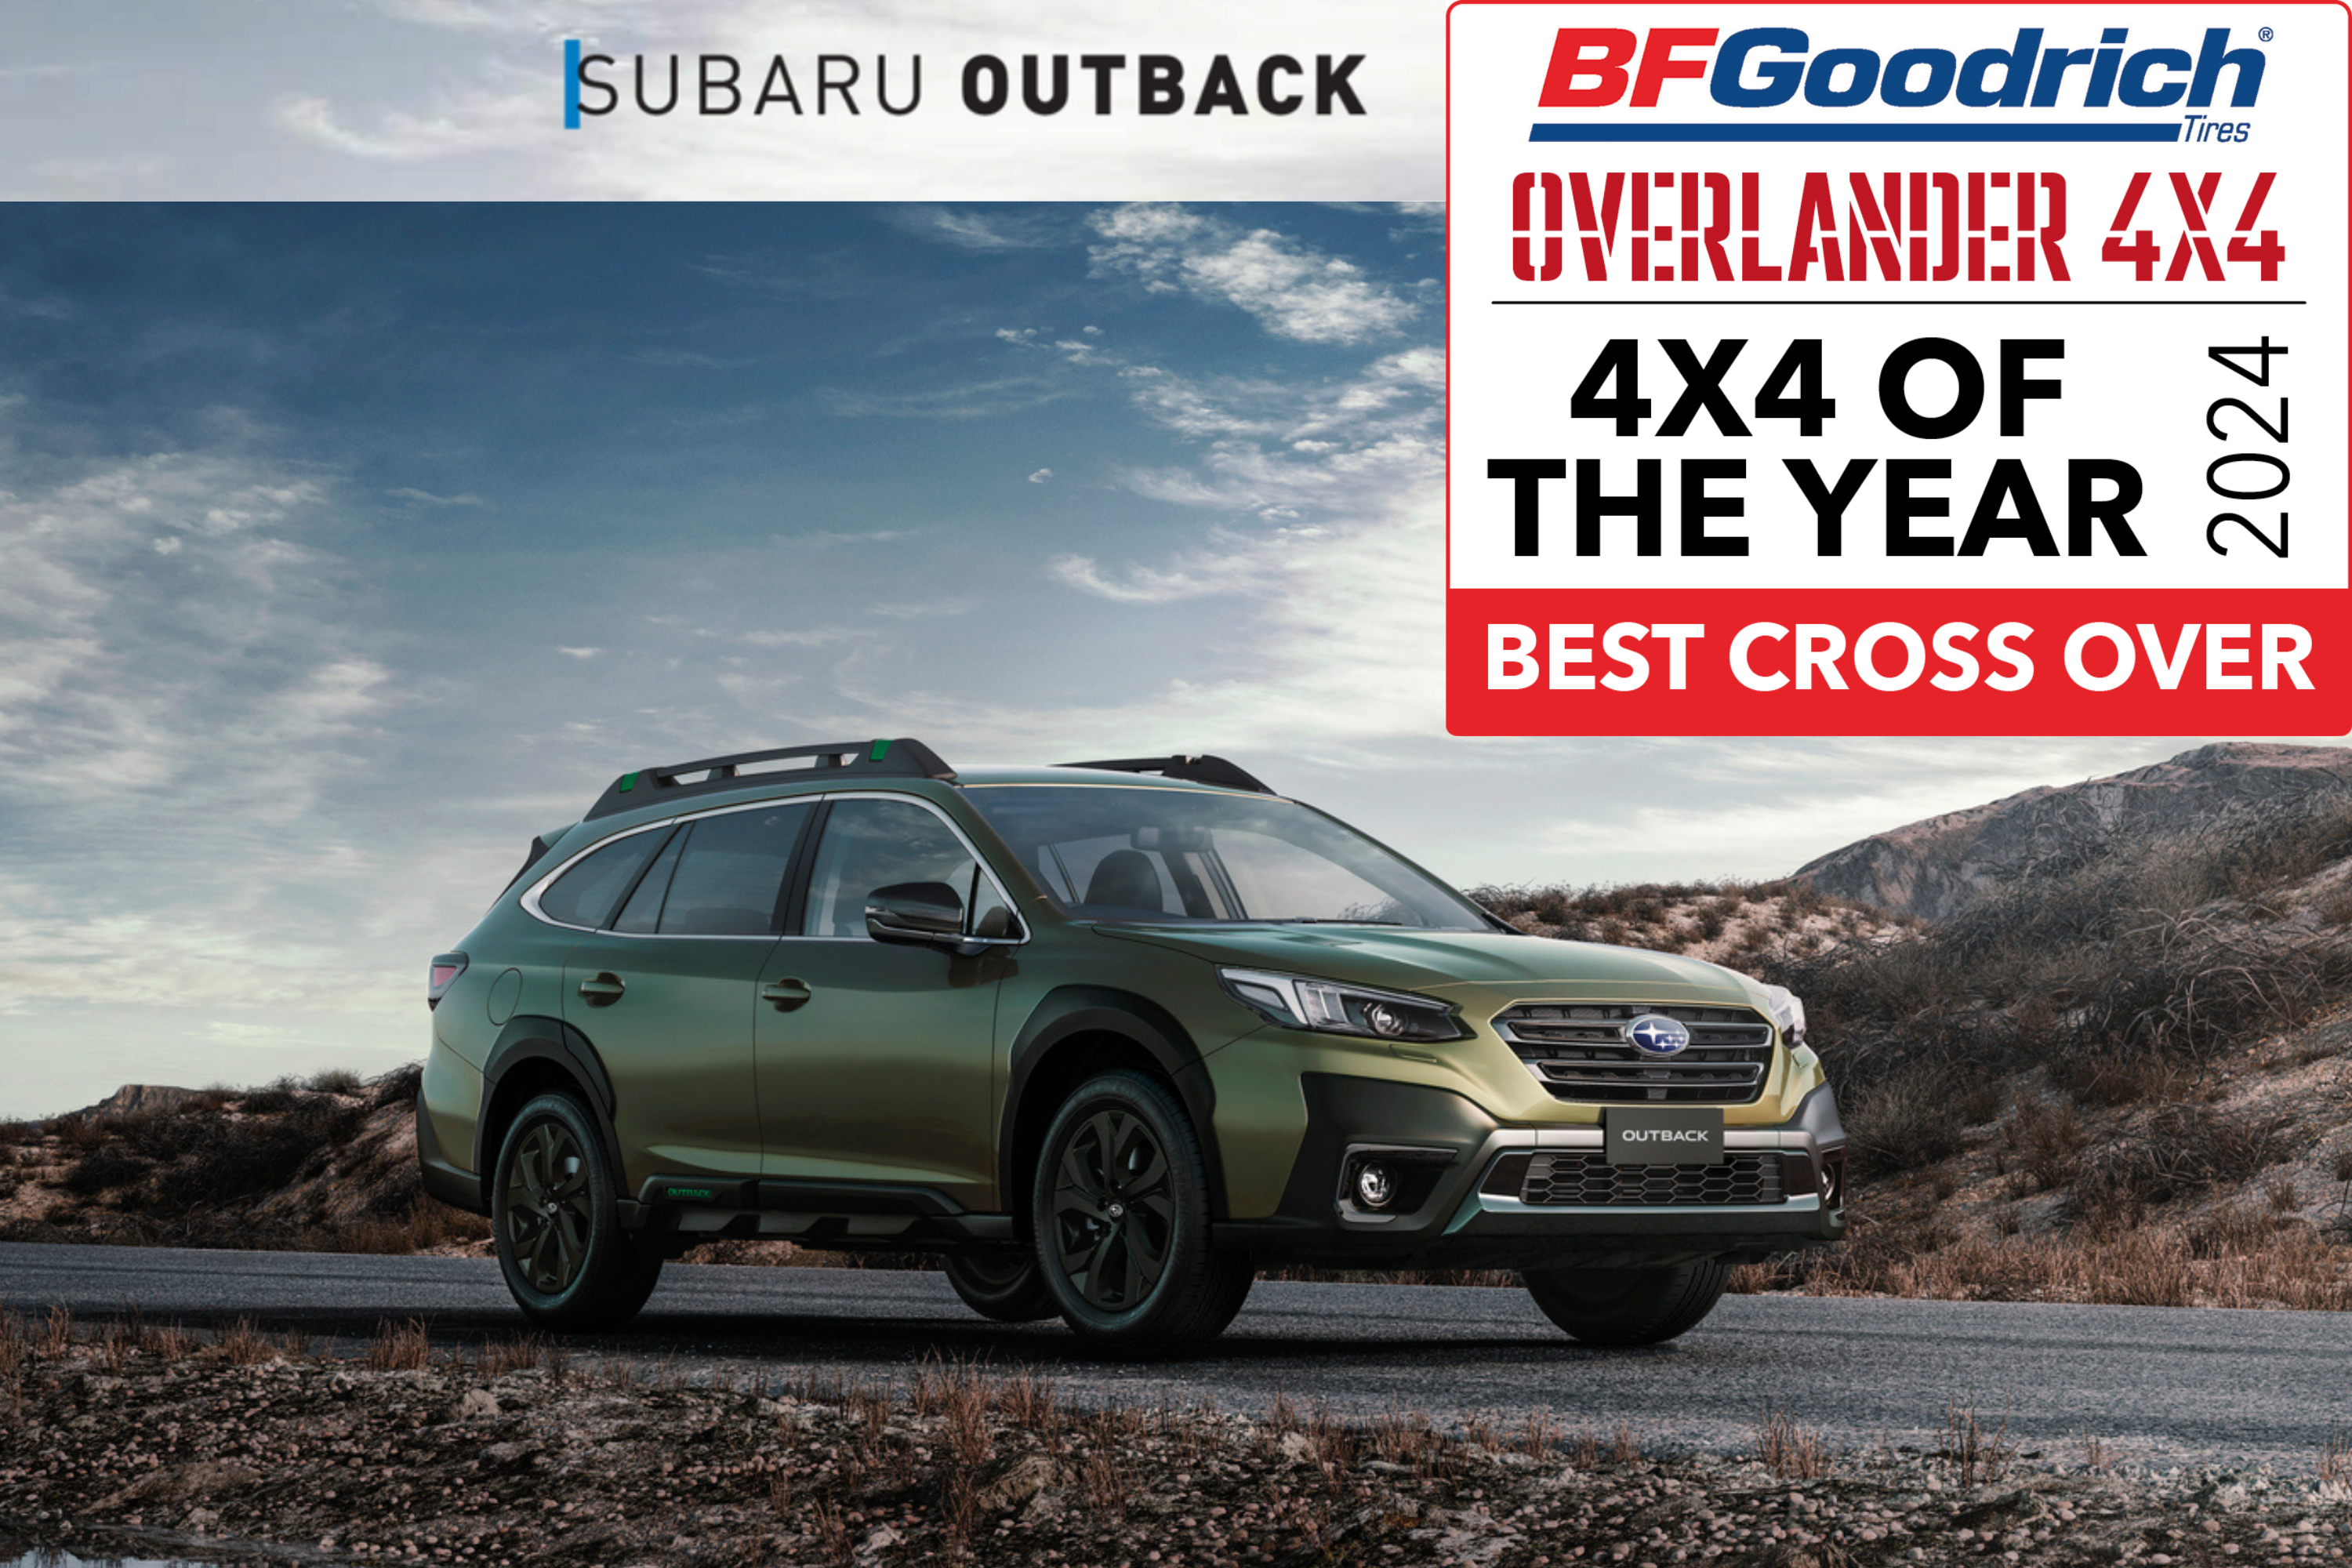 Subaru Outback wins Best Crossover from Overlander 4x4